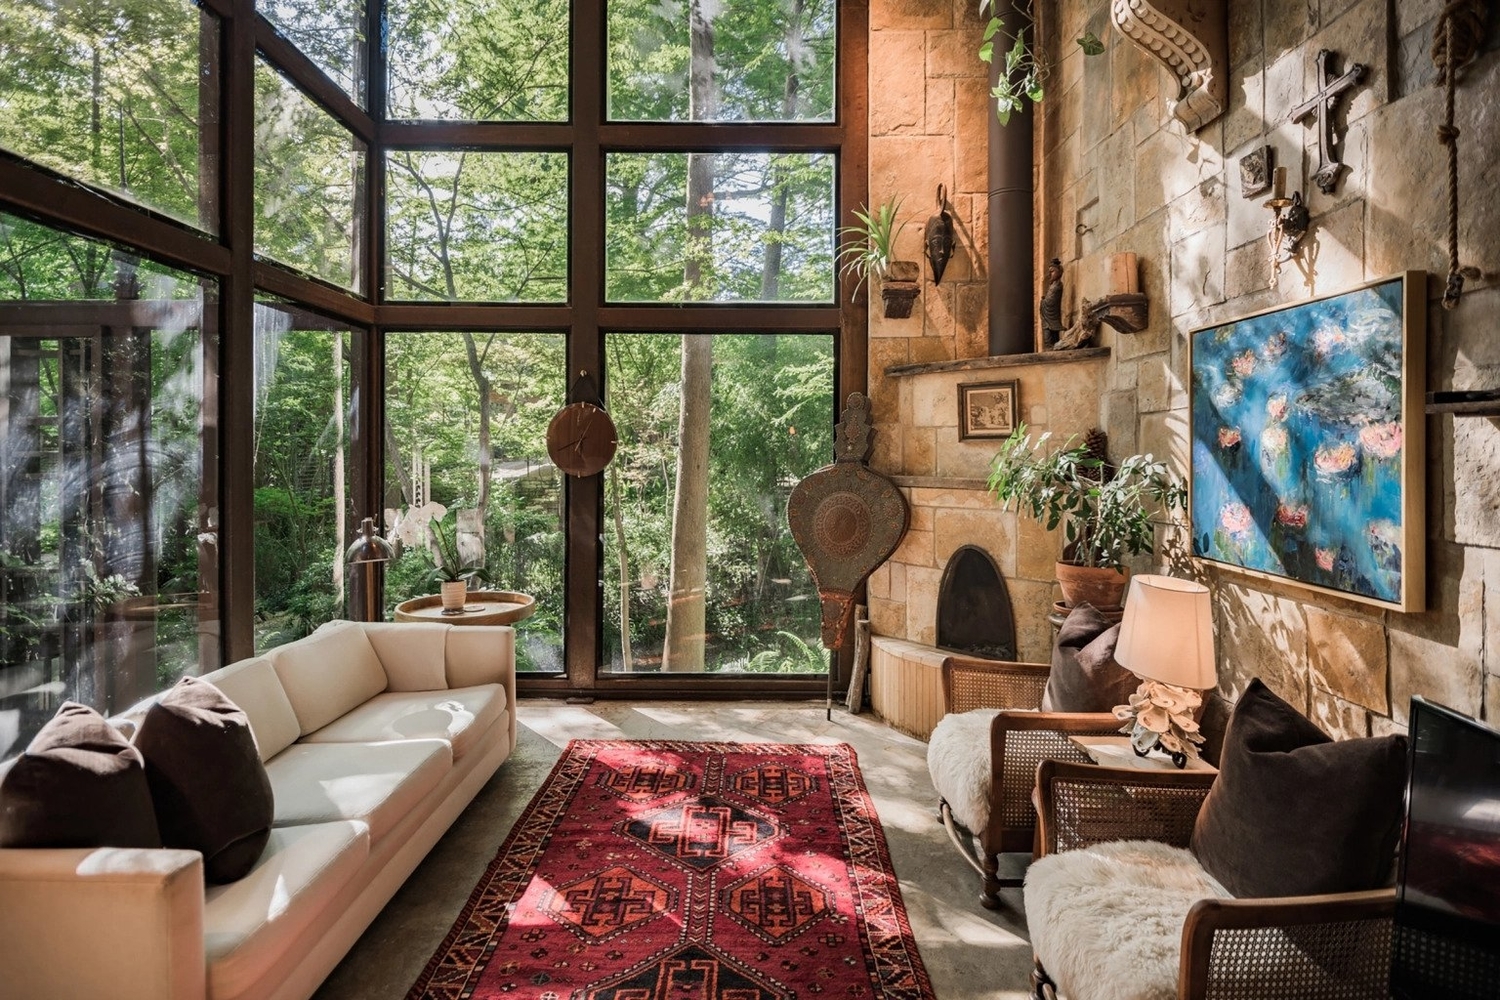 The Most Wish Listed Airbnb in Texas